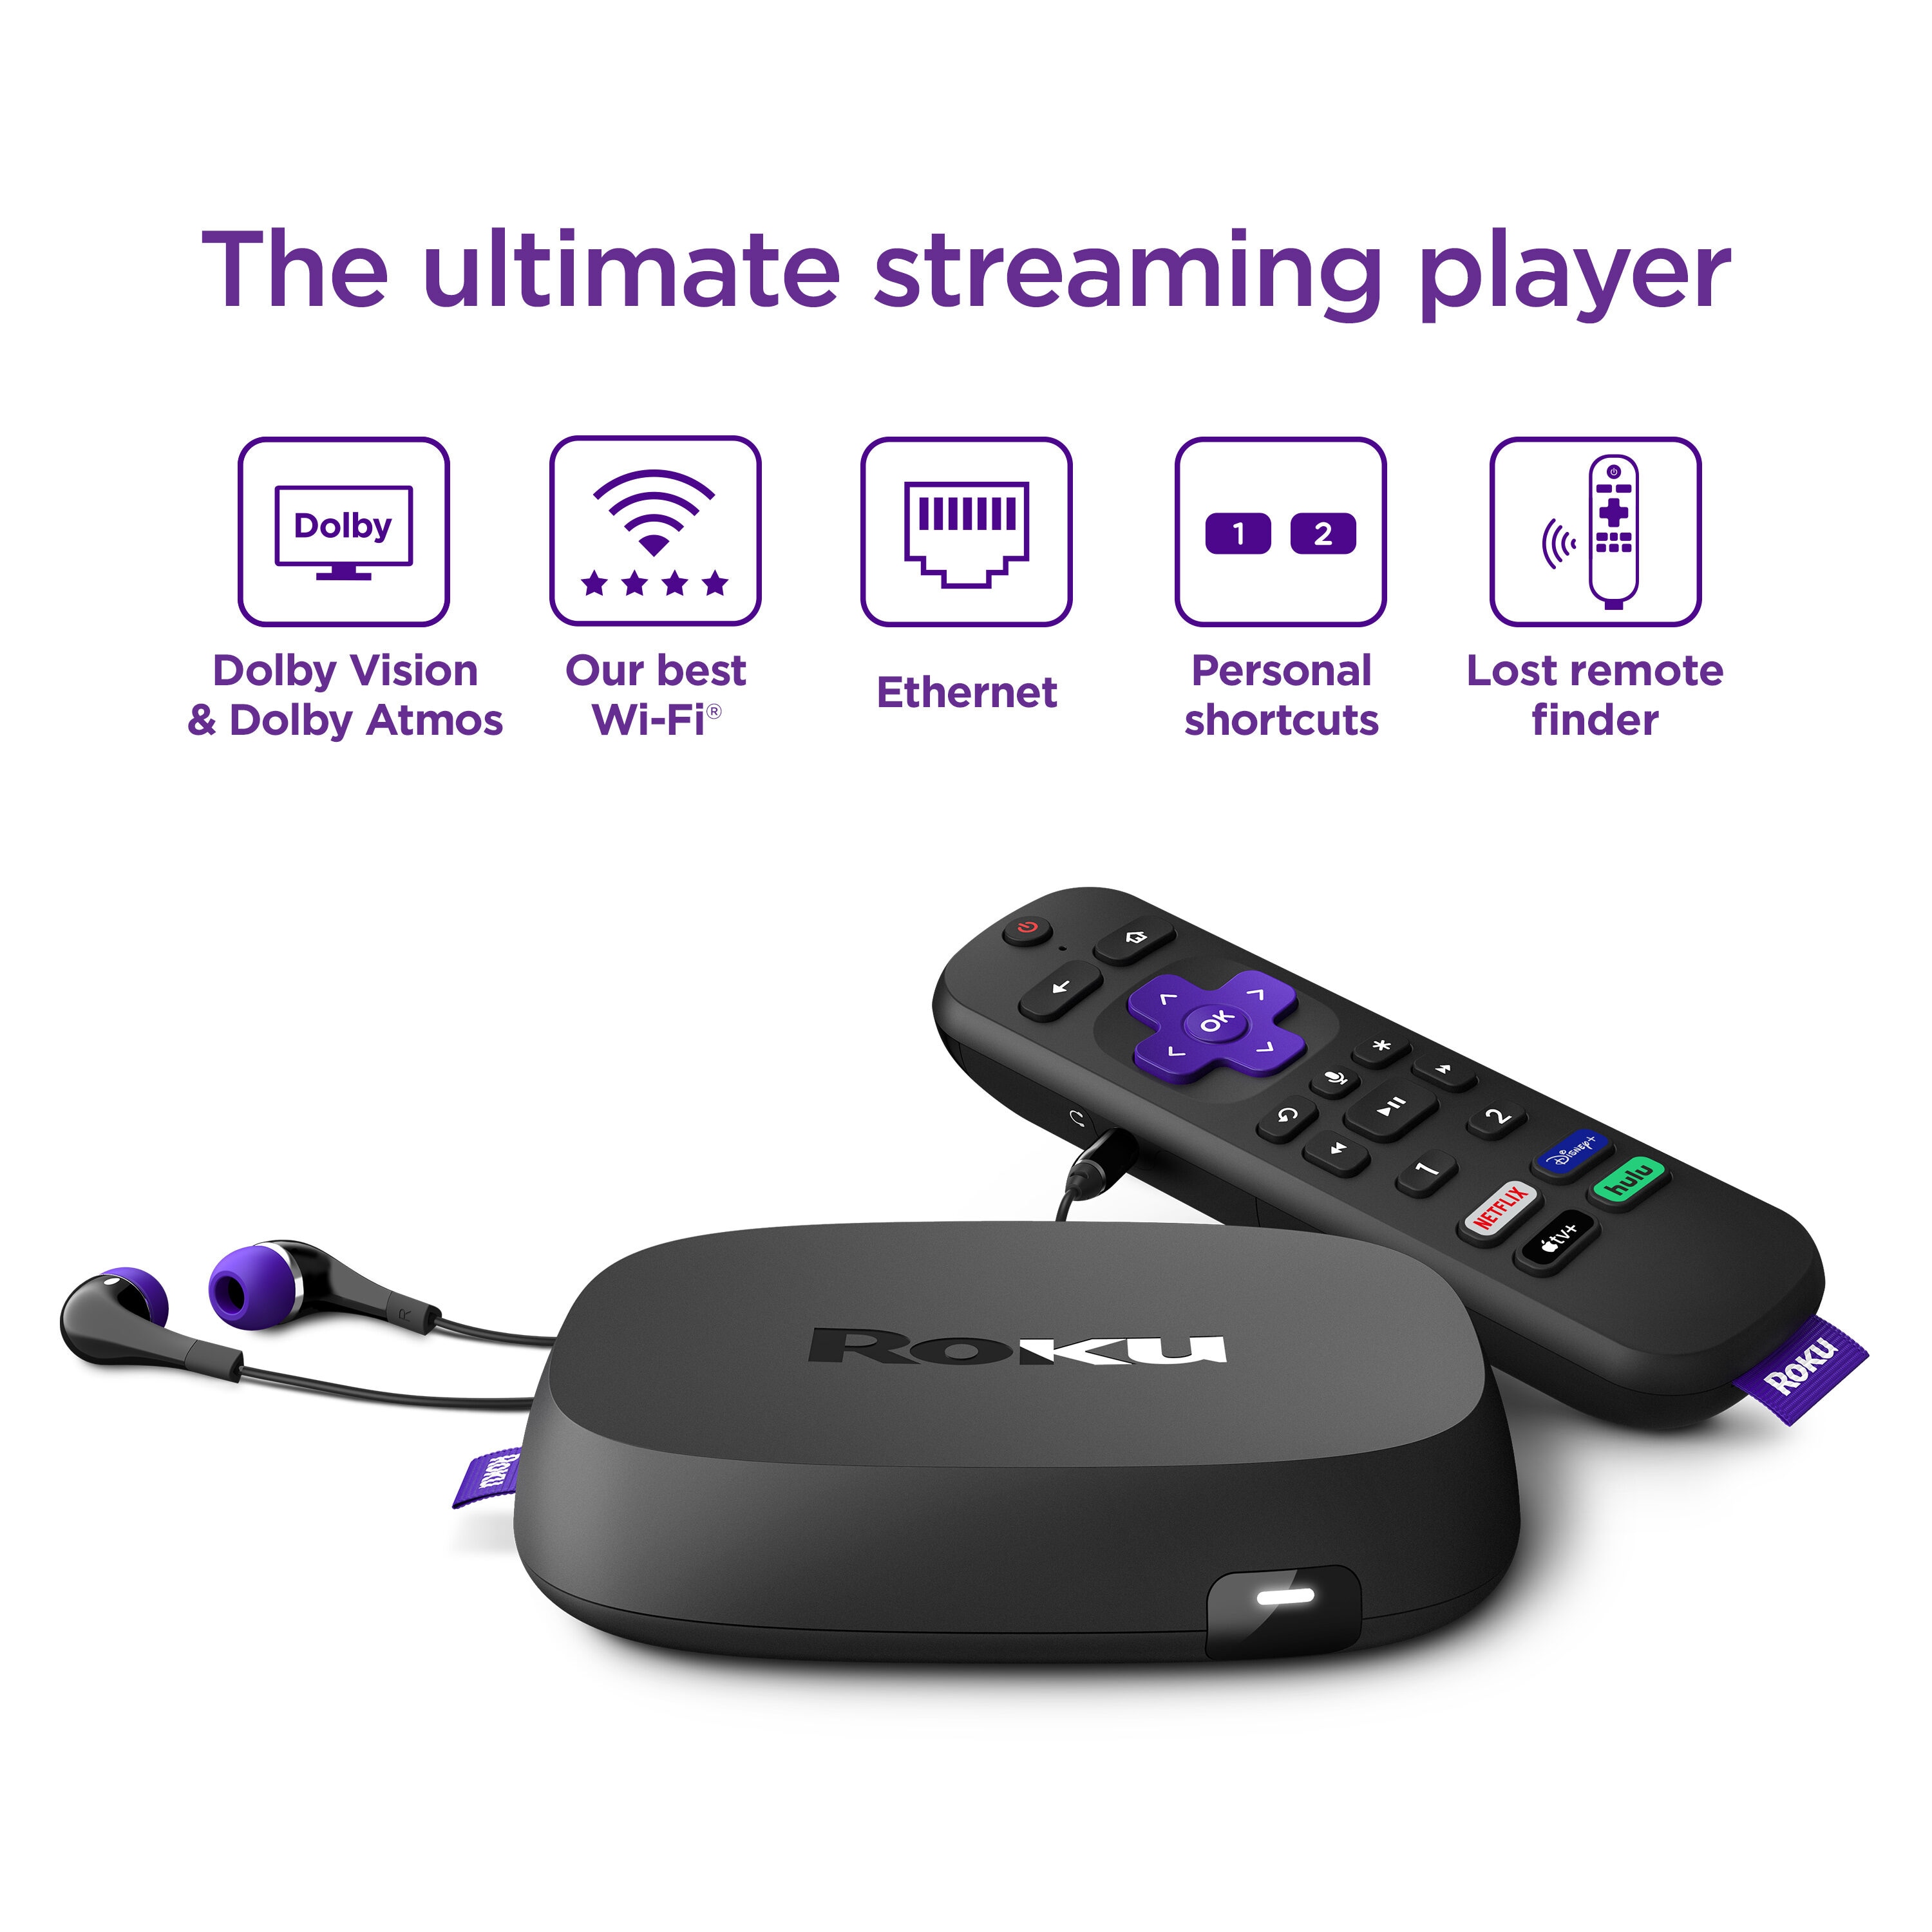 Roku Streaming Stick 4K, TV Stick streaming in 4K, HDR and Dolby Vision